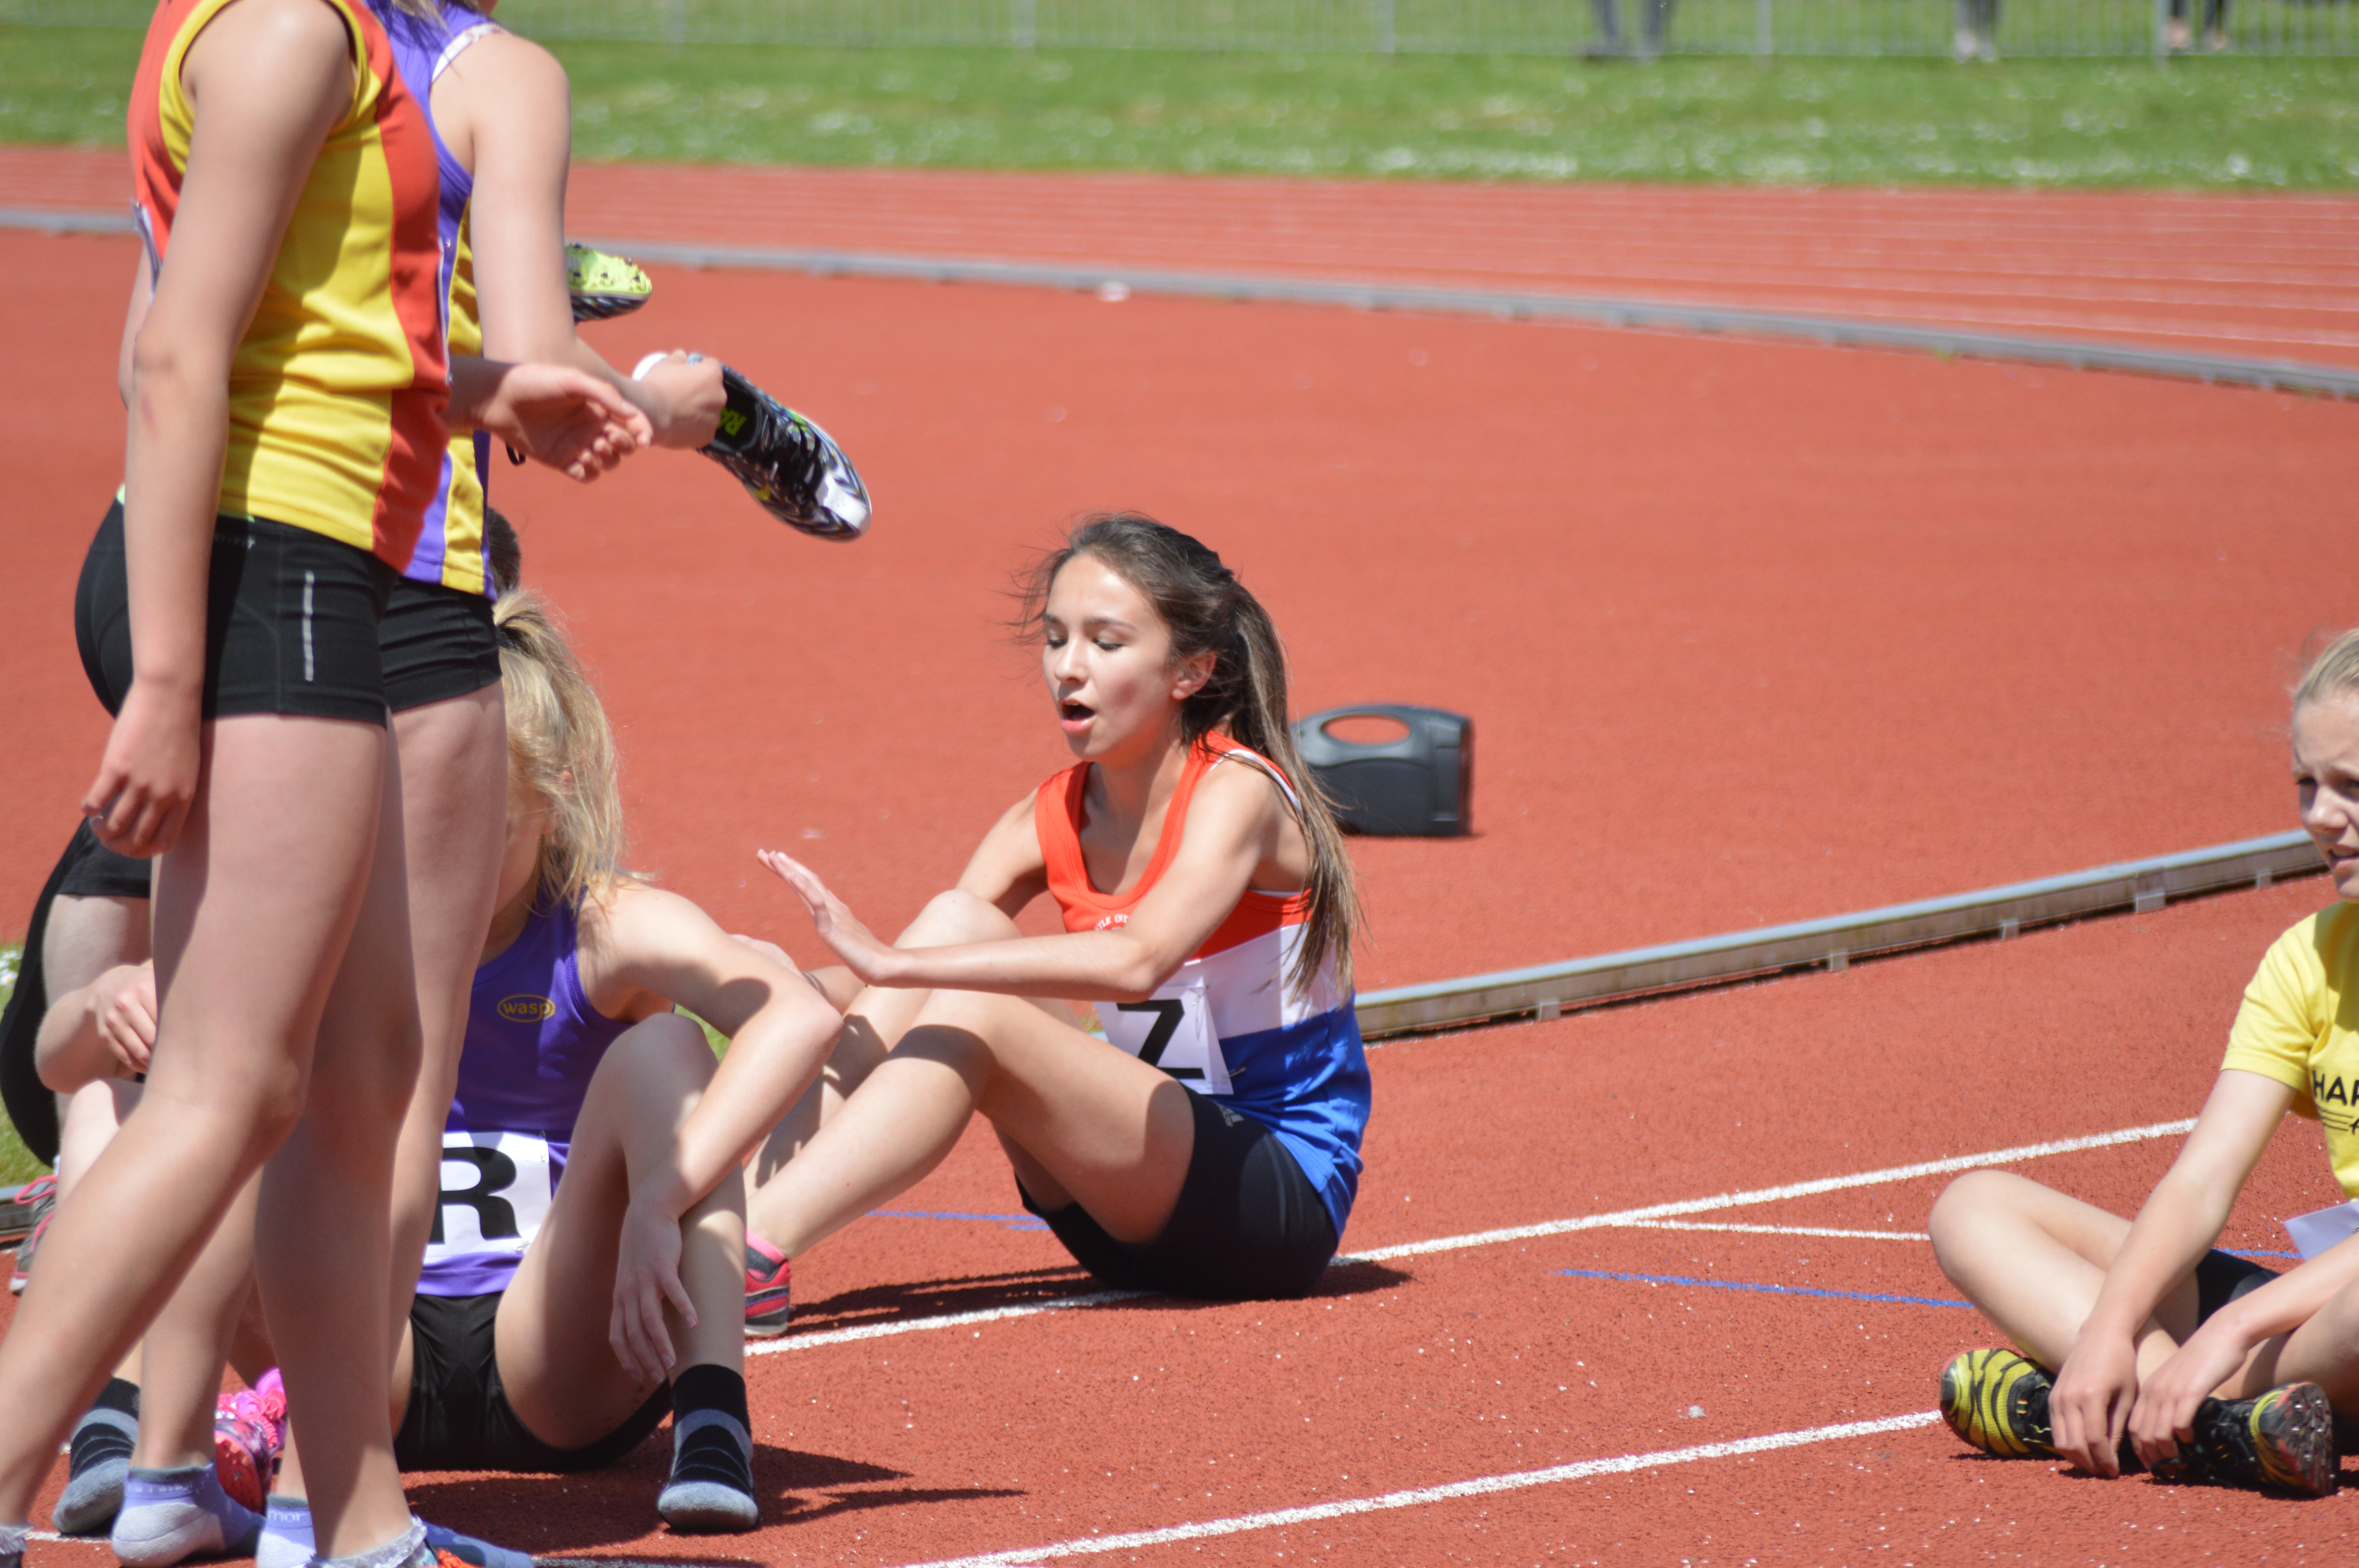 Heart Of England Track and Field League Fixture 2 Picture Gallery – 7/6/15